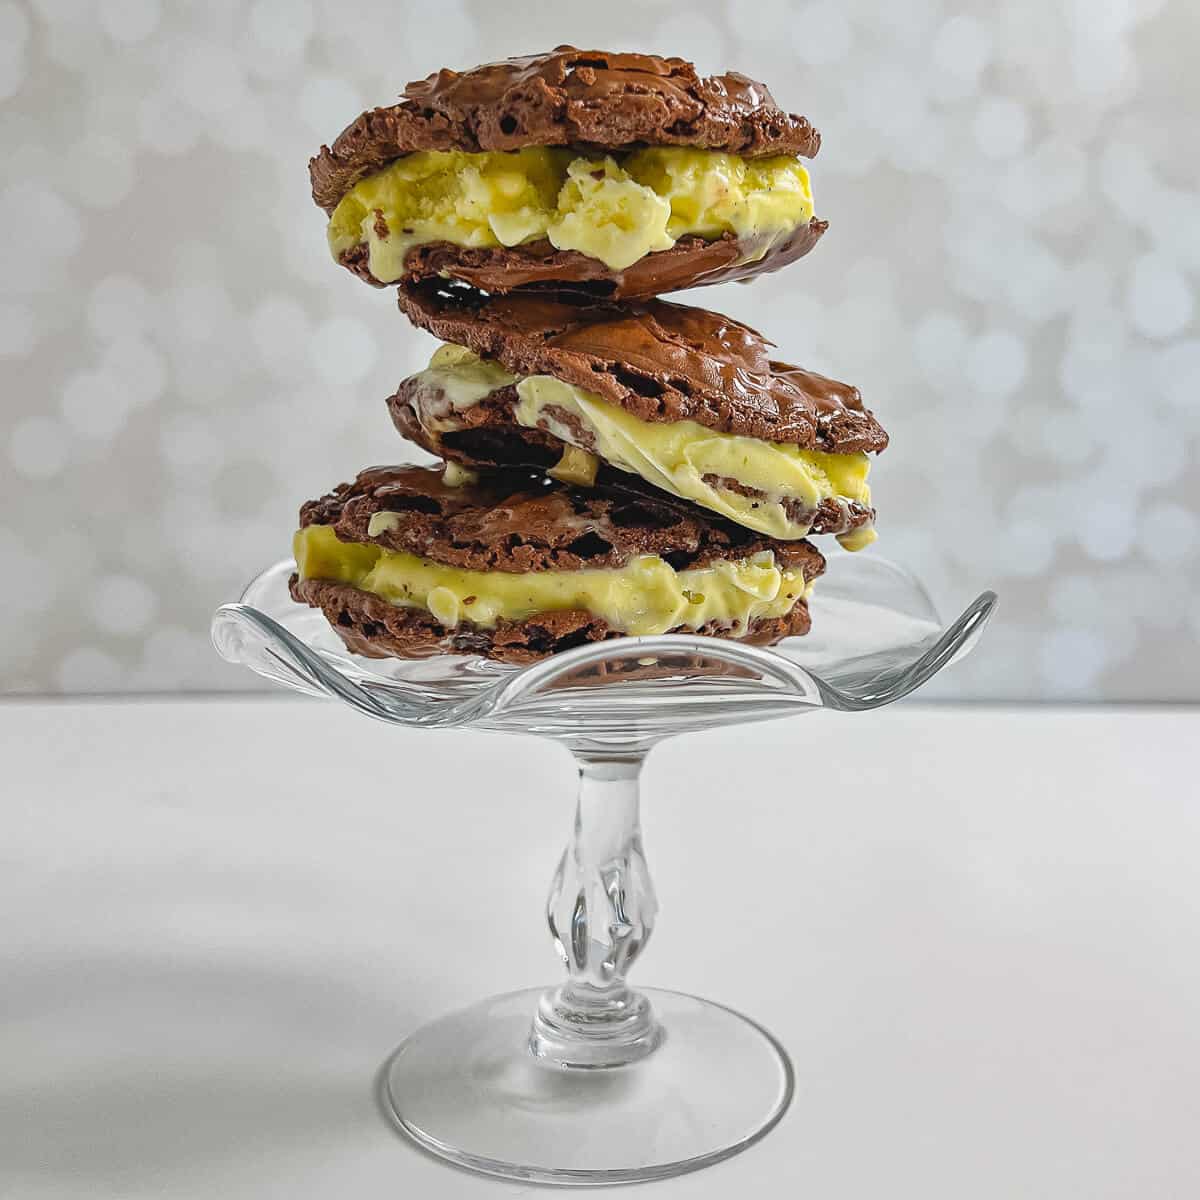 Gluten-Free Ice Cream Sandwiches stacked on glass cake stand.